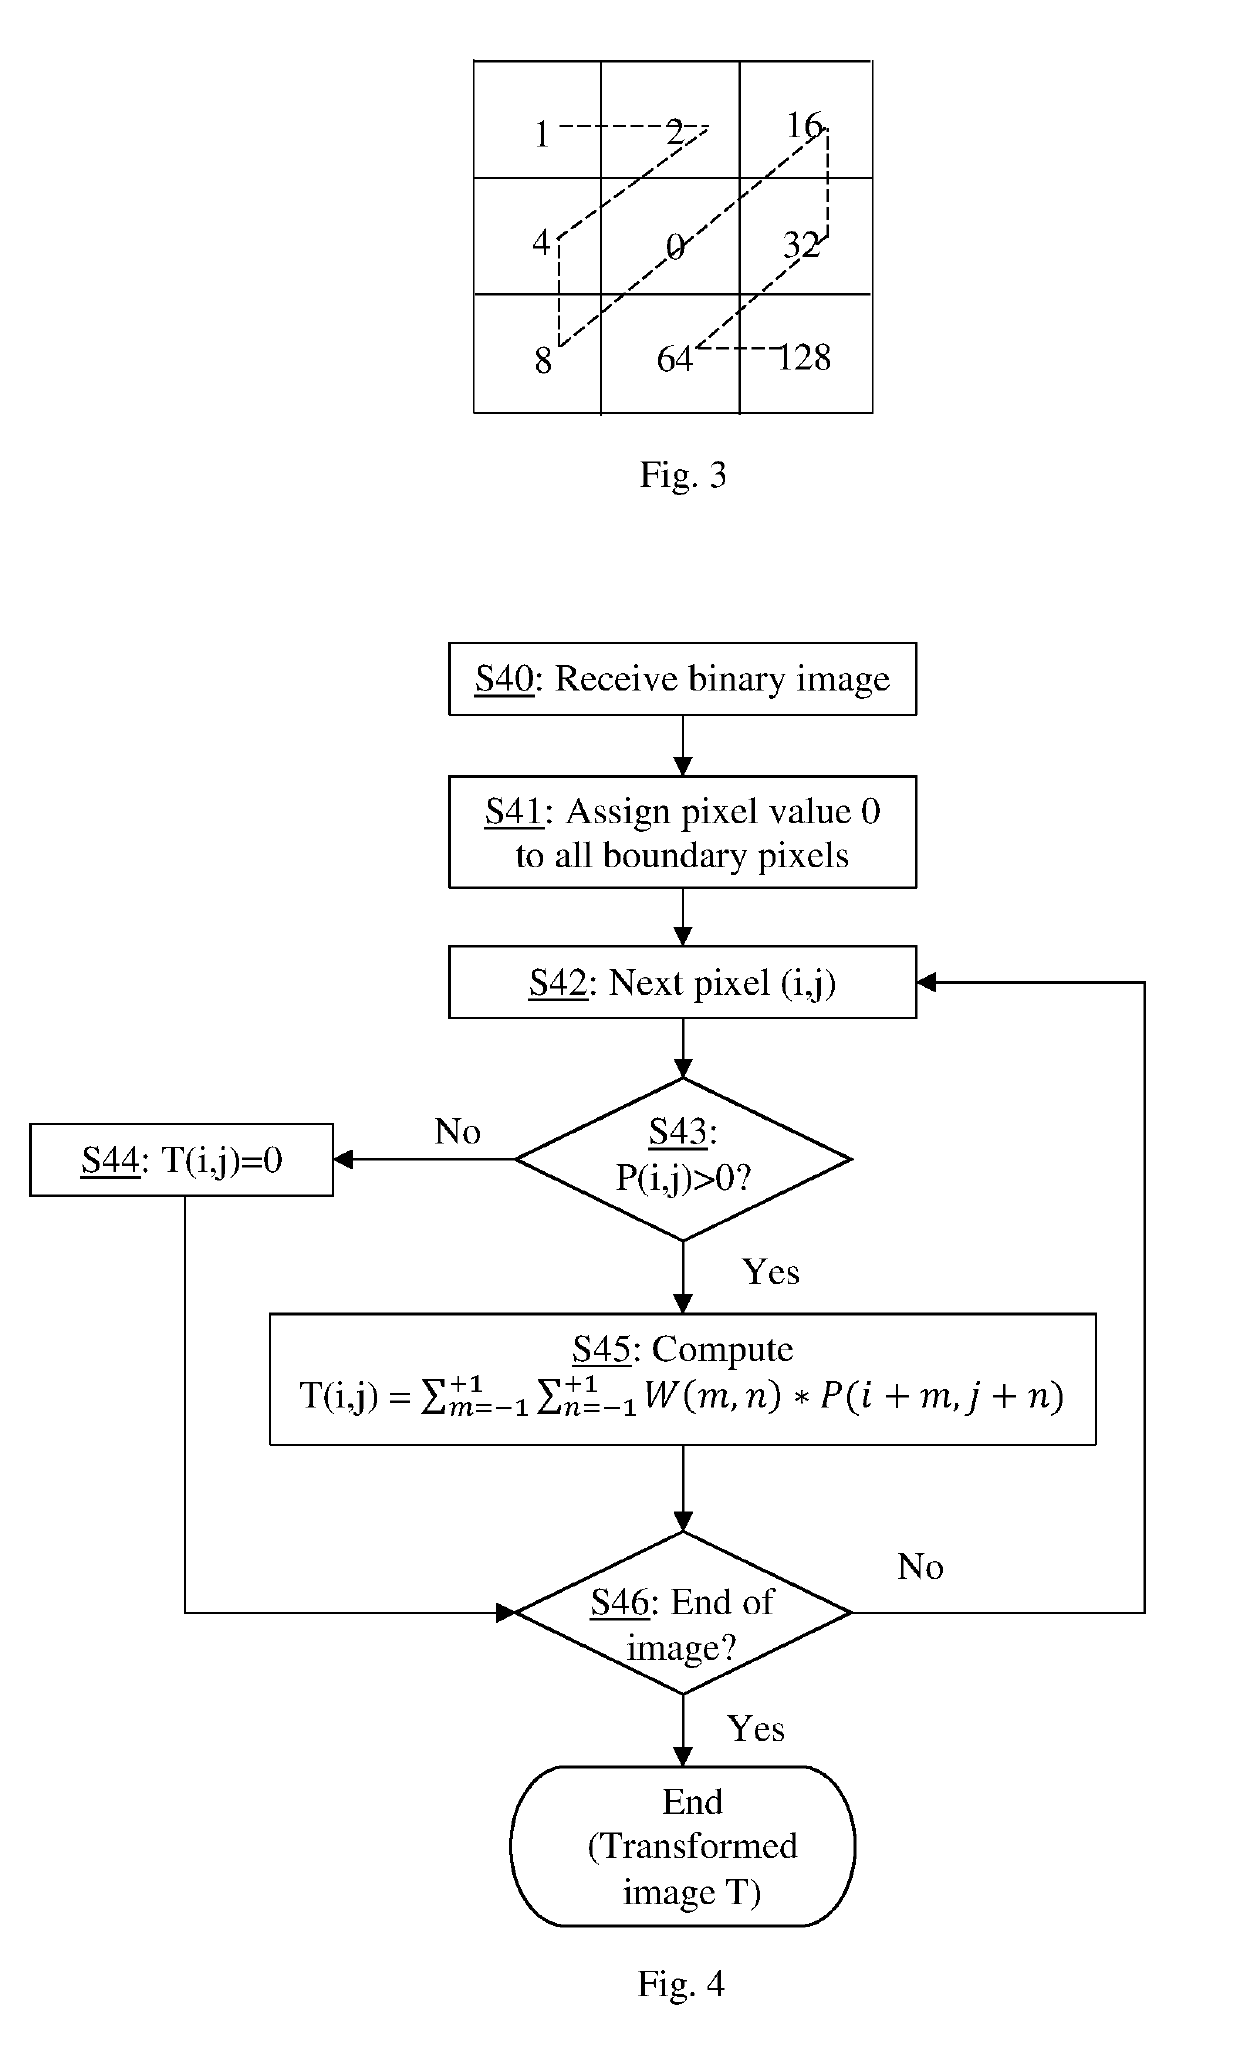 Local connectivity feature transform of binary images containing text characters for optical character/word recognition